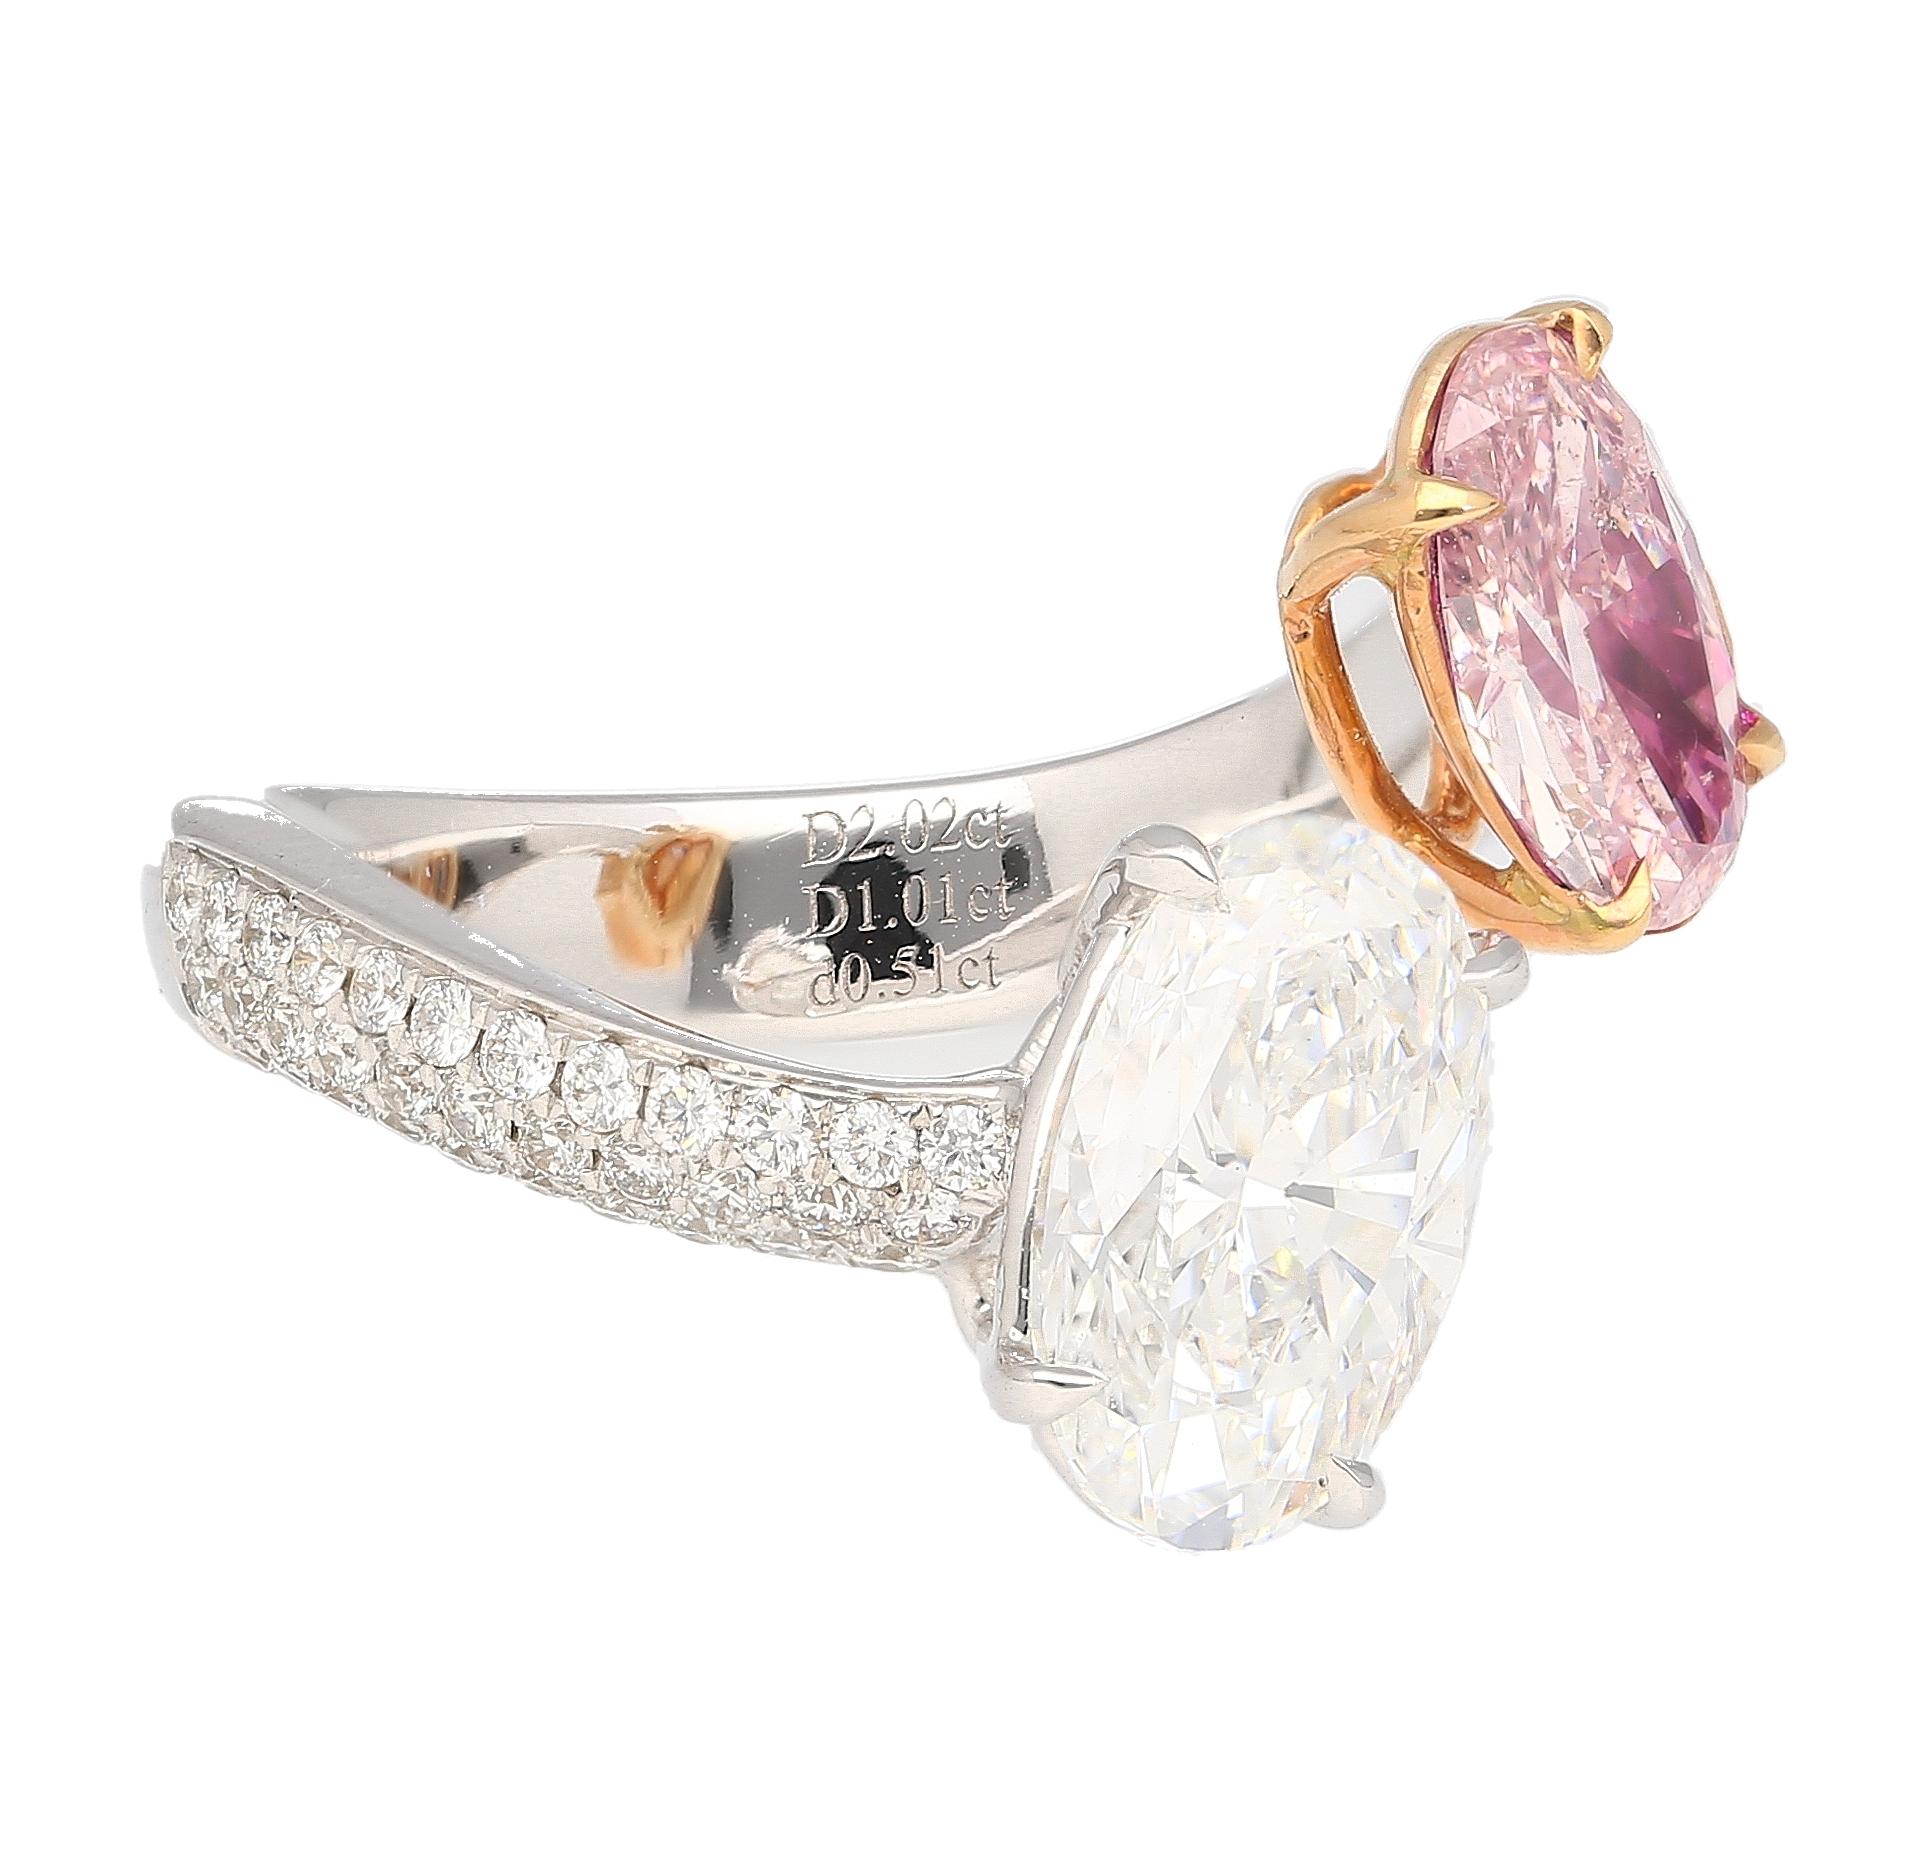 Oval Cut Gia Certified Fancy Orangy Pink and White Diamond Toi Et Moi 18k White Gold Ring For Sale